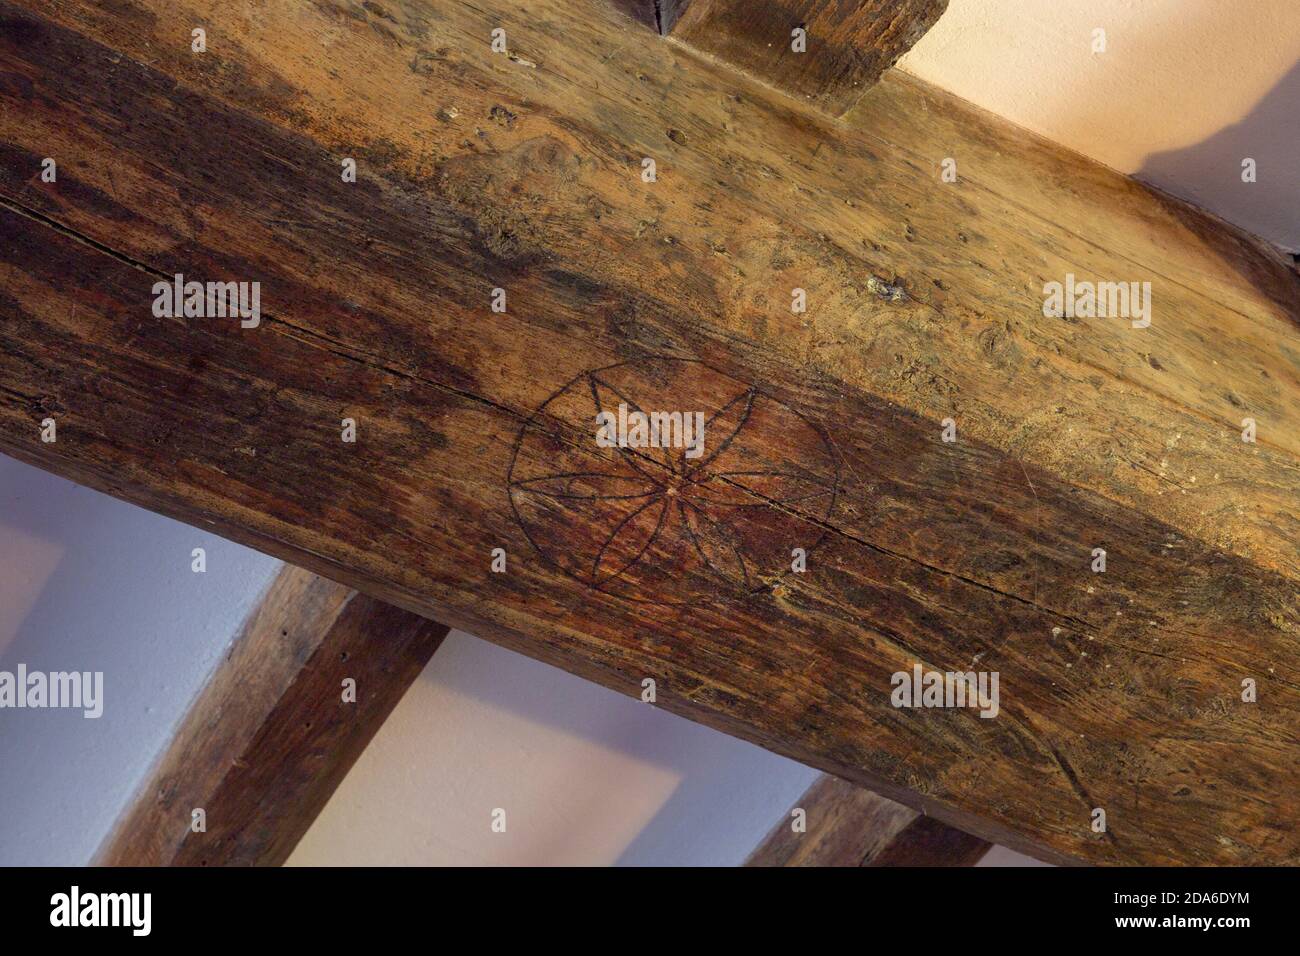 Witches Mark on cottage roof beam wood timber,England,Europe Stock Photo